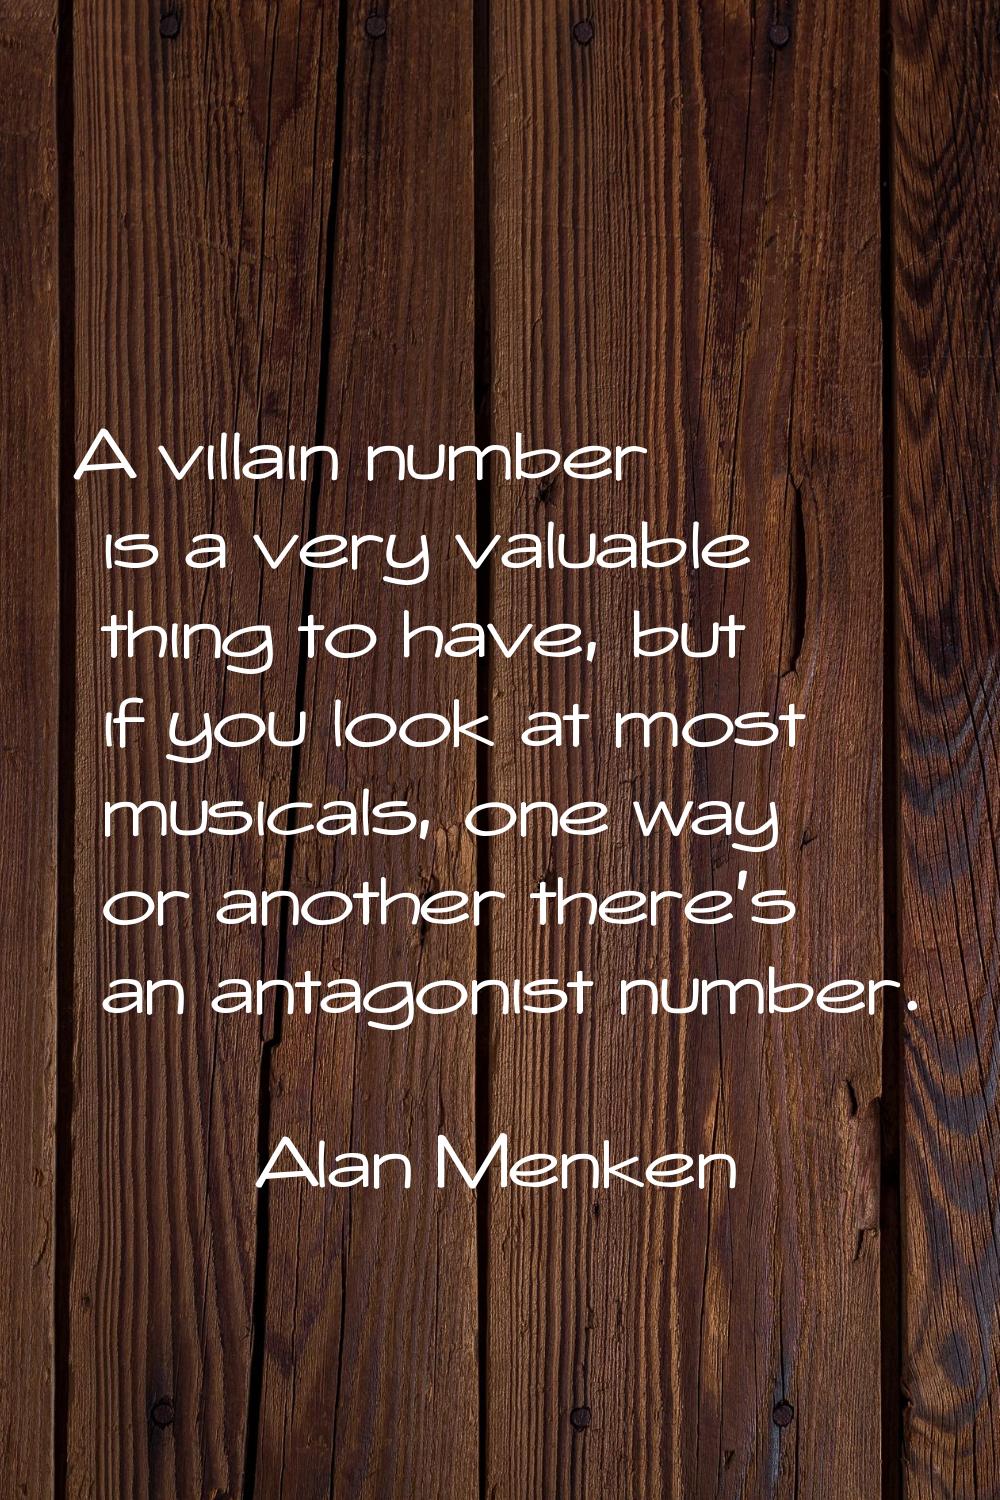 A villain number is a very valuable thing to have, but if you look at most musicals, one way or ano